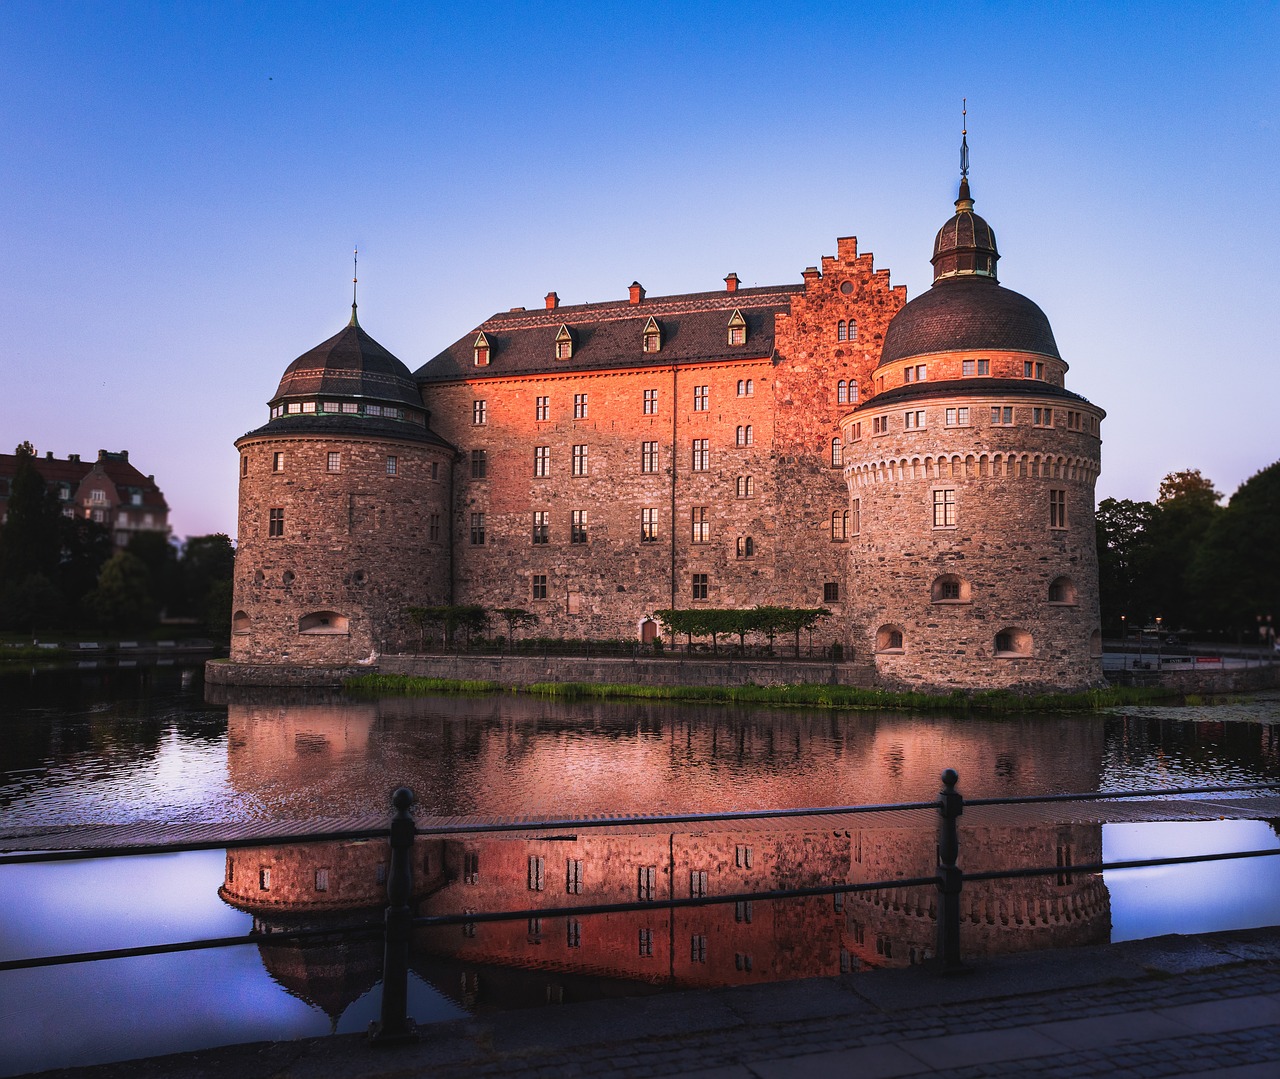 A Day of Mystery and Culinary Delights in Örebro